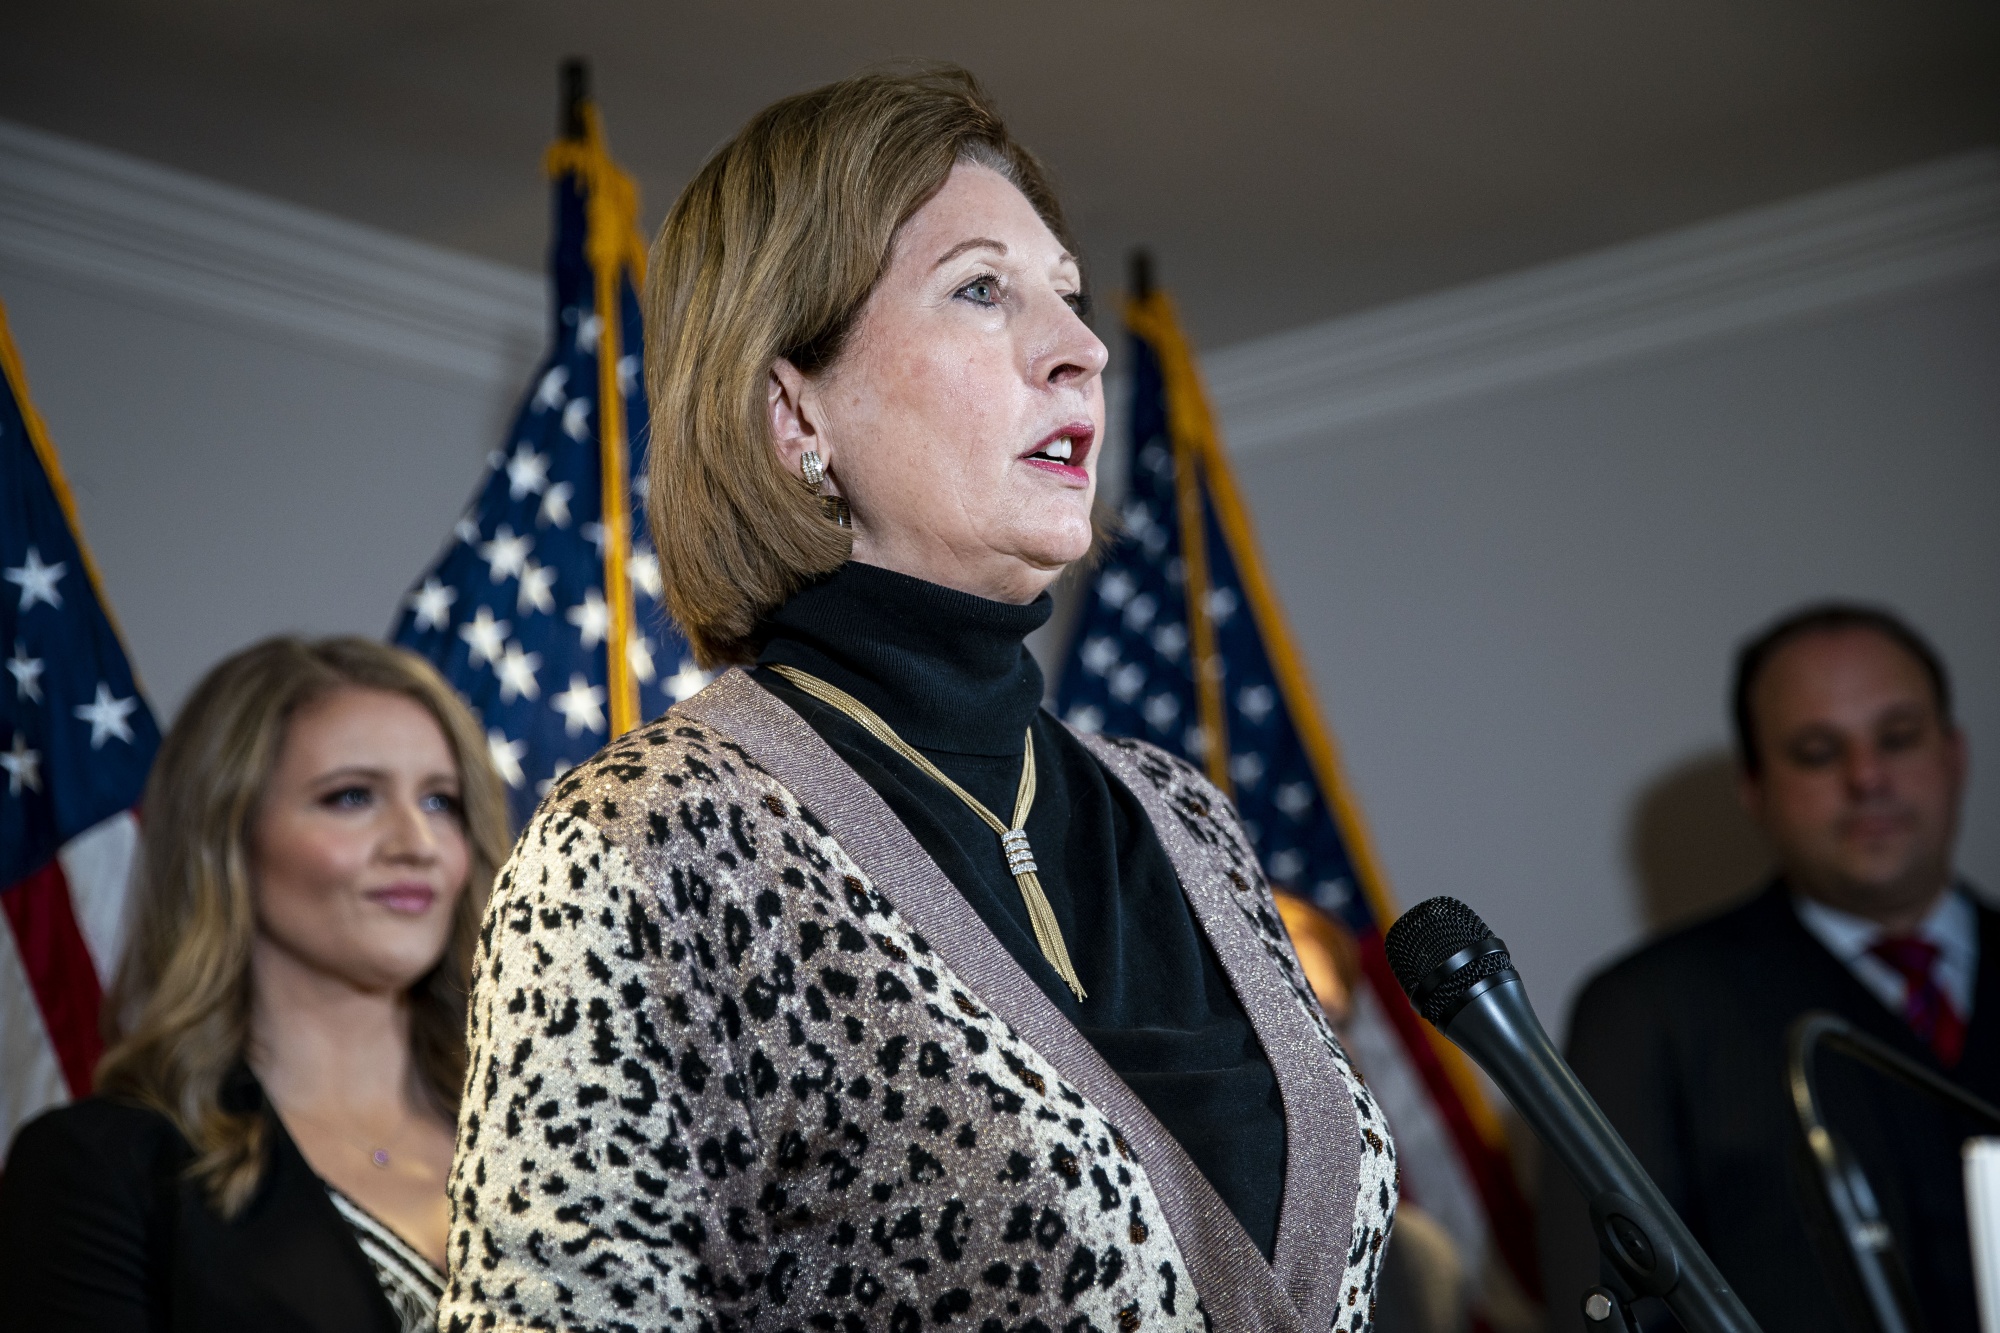 Sidney Powell speaks during a press conference at the Republican National Committee headquarters in Washington, DC on November 19, 2020.